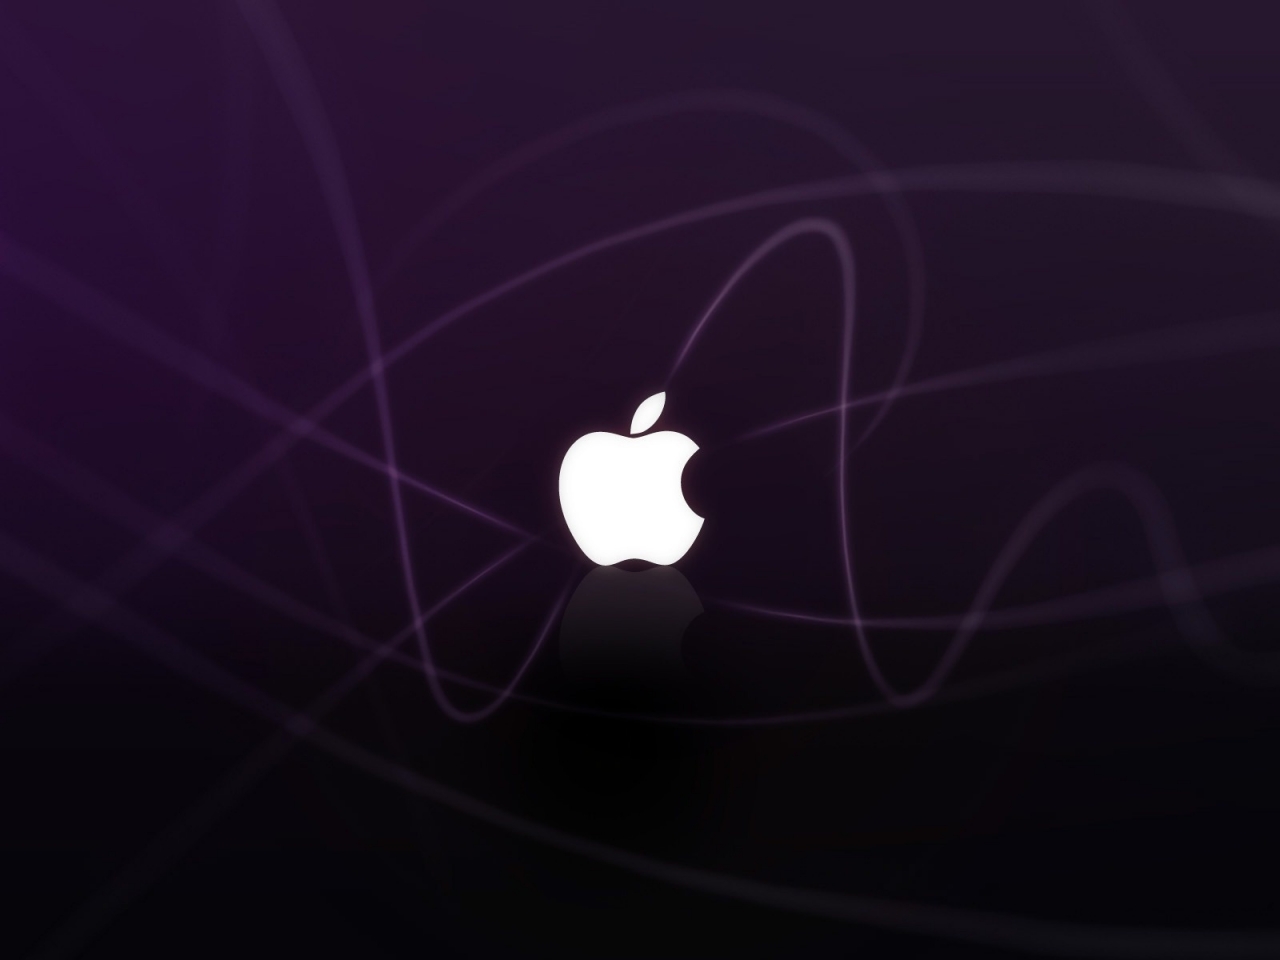 Purple Apple frequency for 1280 x 960 resolution